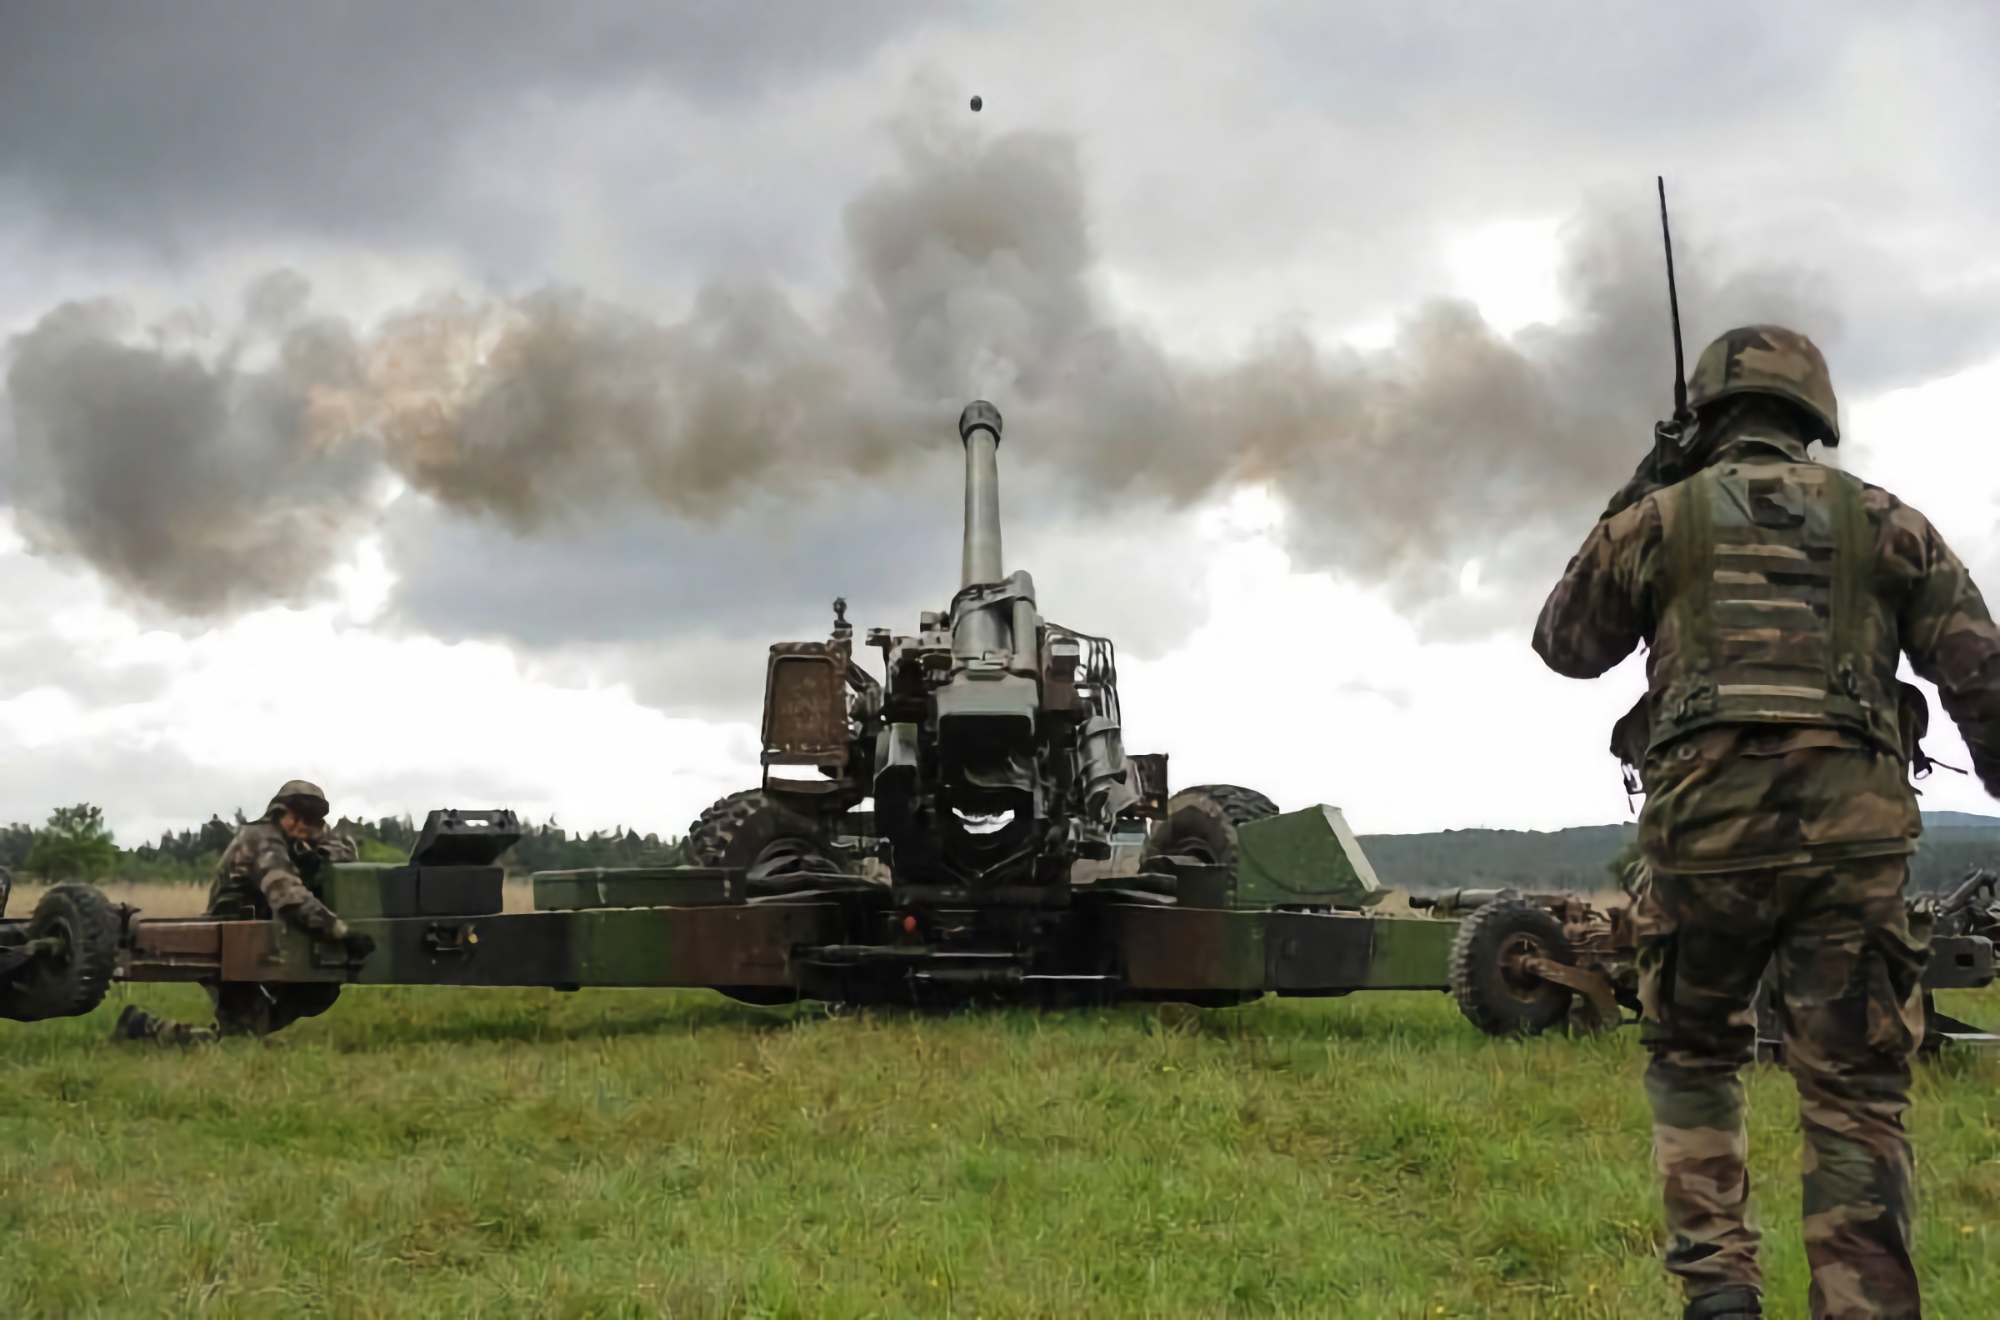 France transferred the 155-mm TRF1 howitzers to the AFU, they can fire at a rate of 6 rounds per minute and hit targets at a distance of up to 30 km